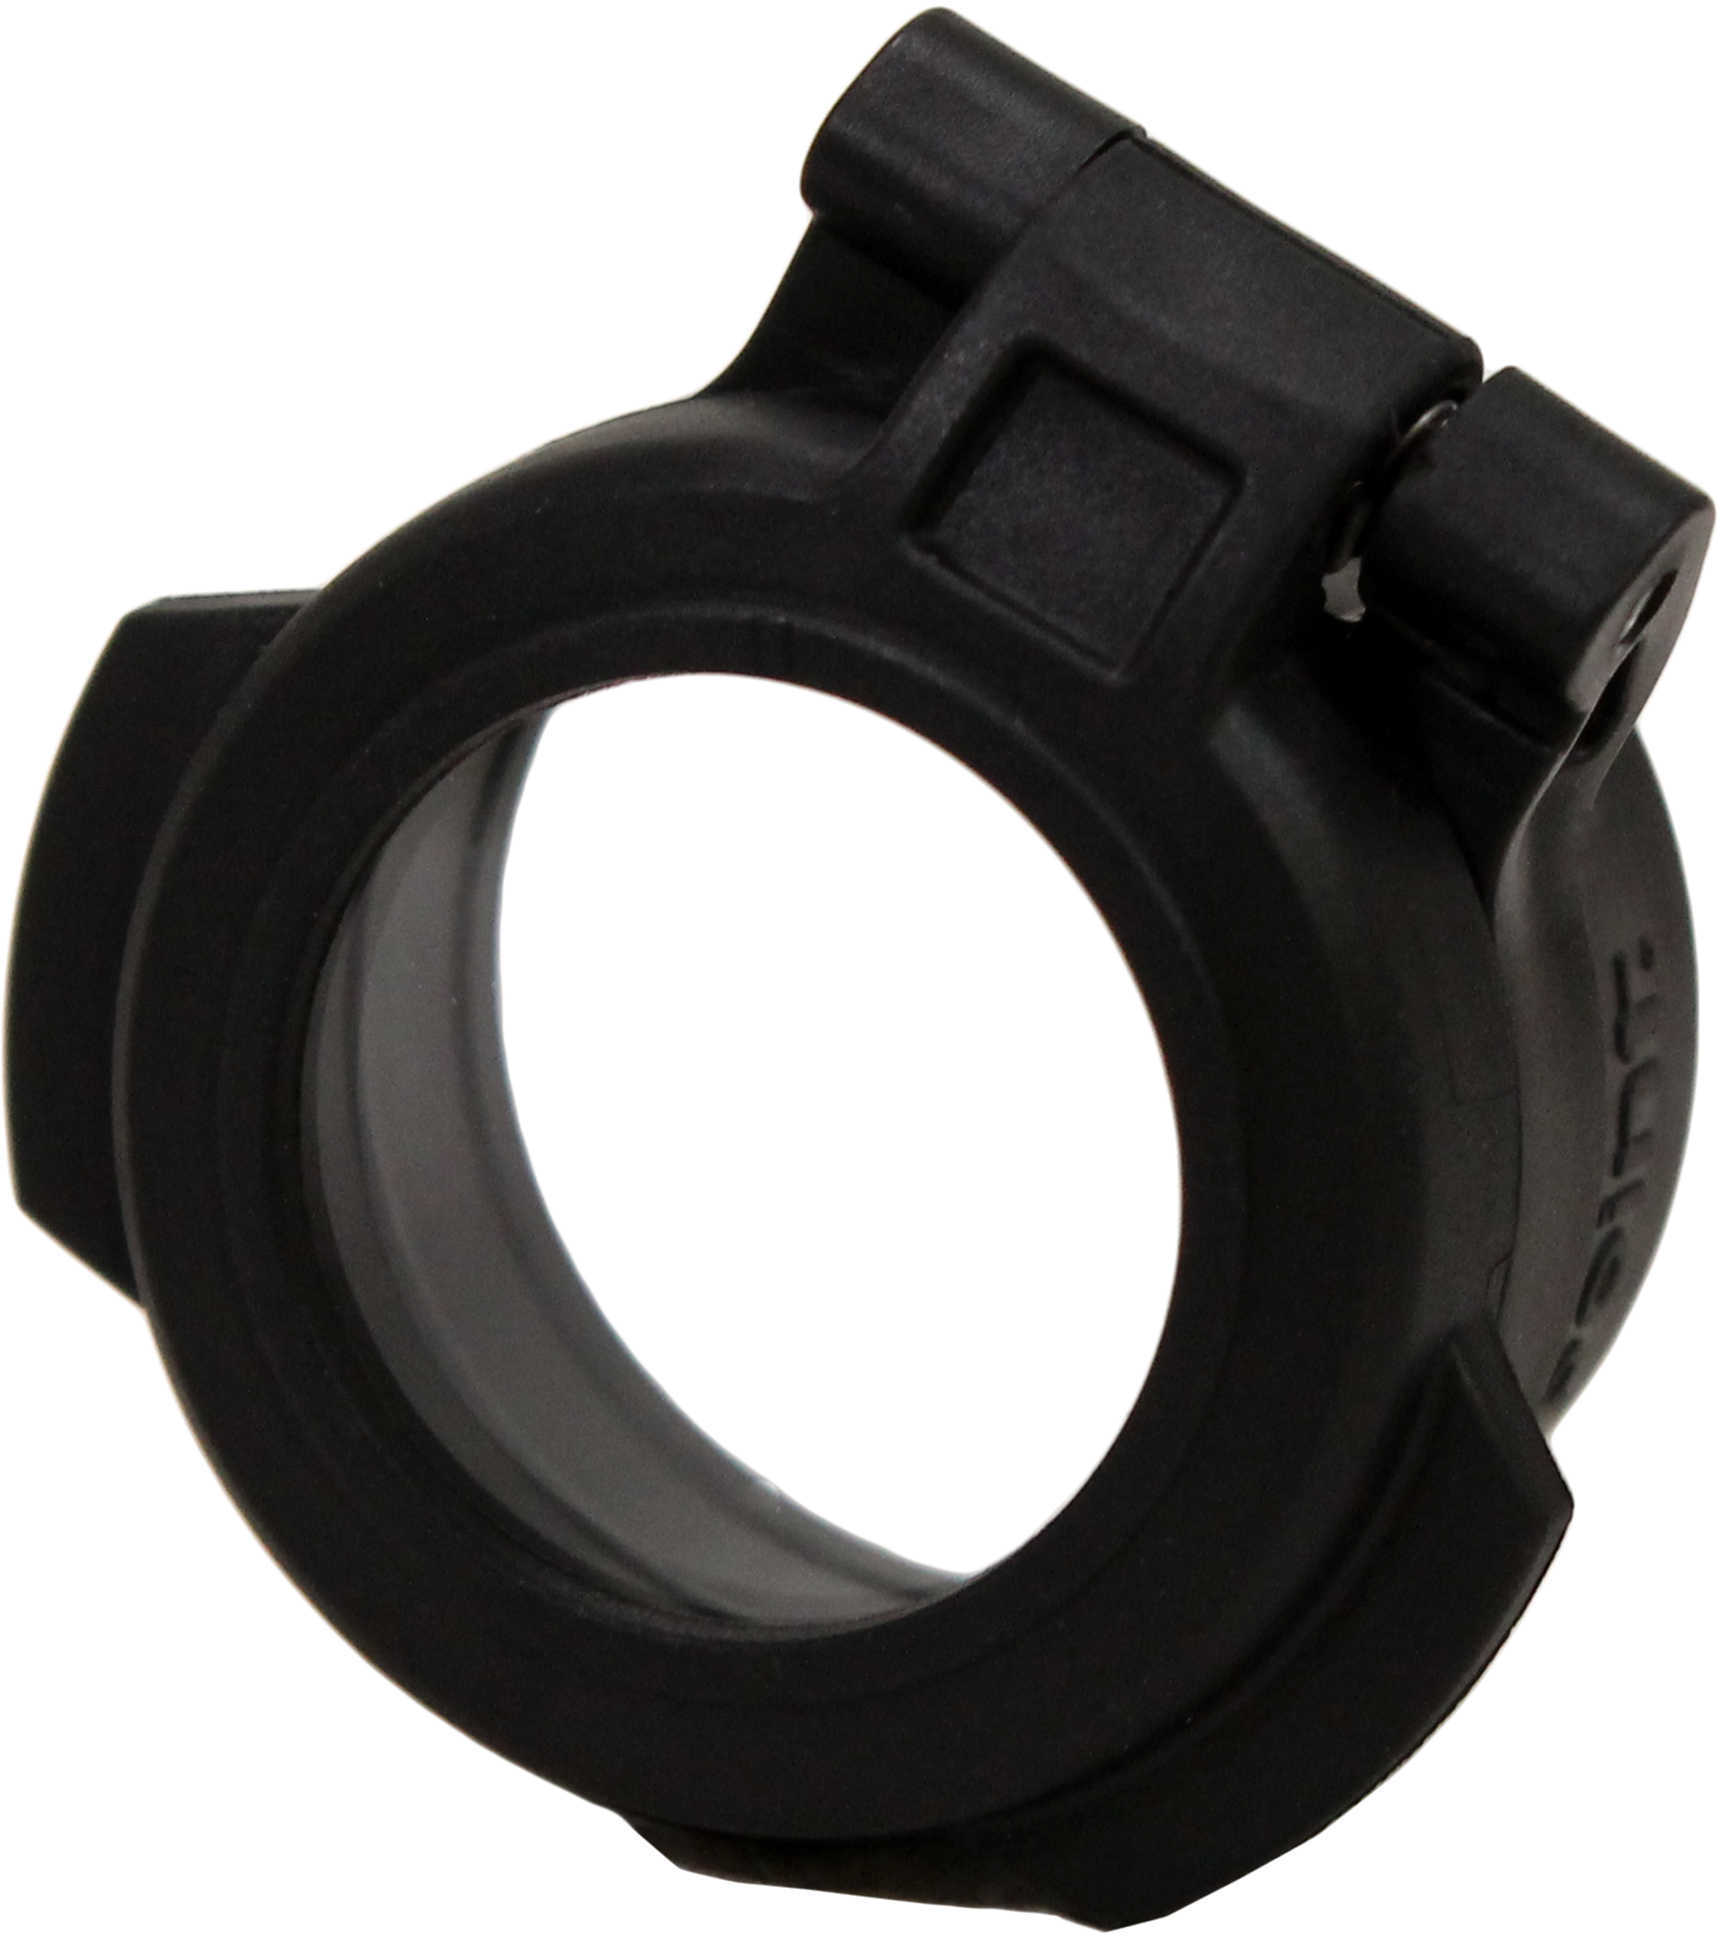 Aimpoint Lens Cover Rear Flip-Up ST H30 Kit Md: 200354